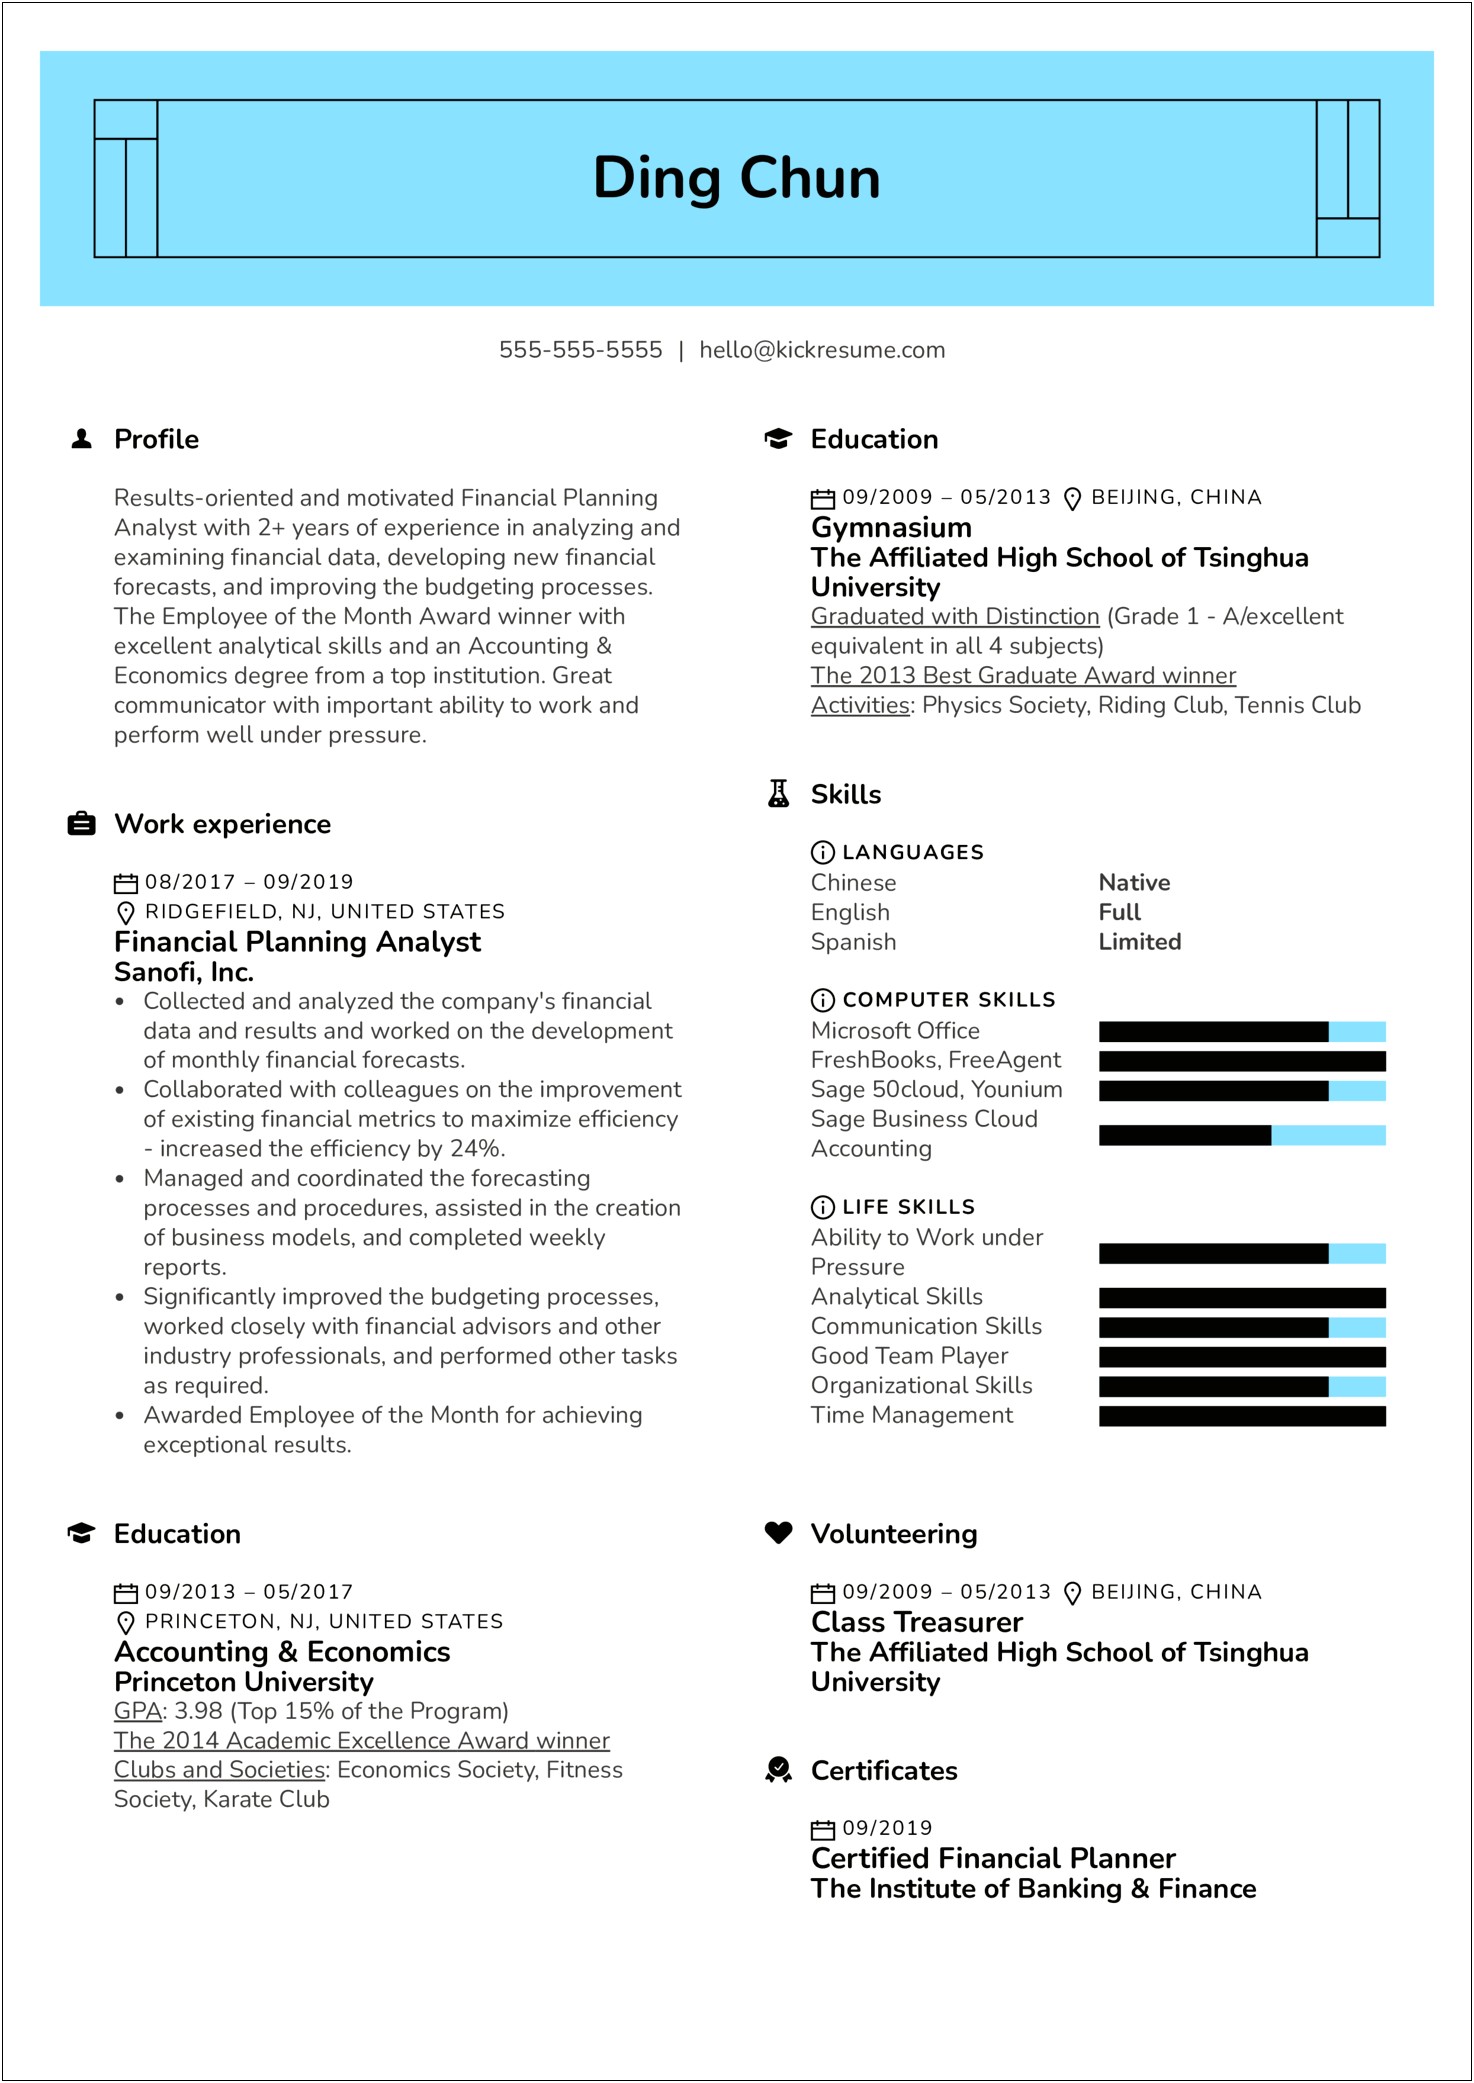 Sample Resume Financia Analys For A Banking